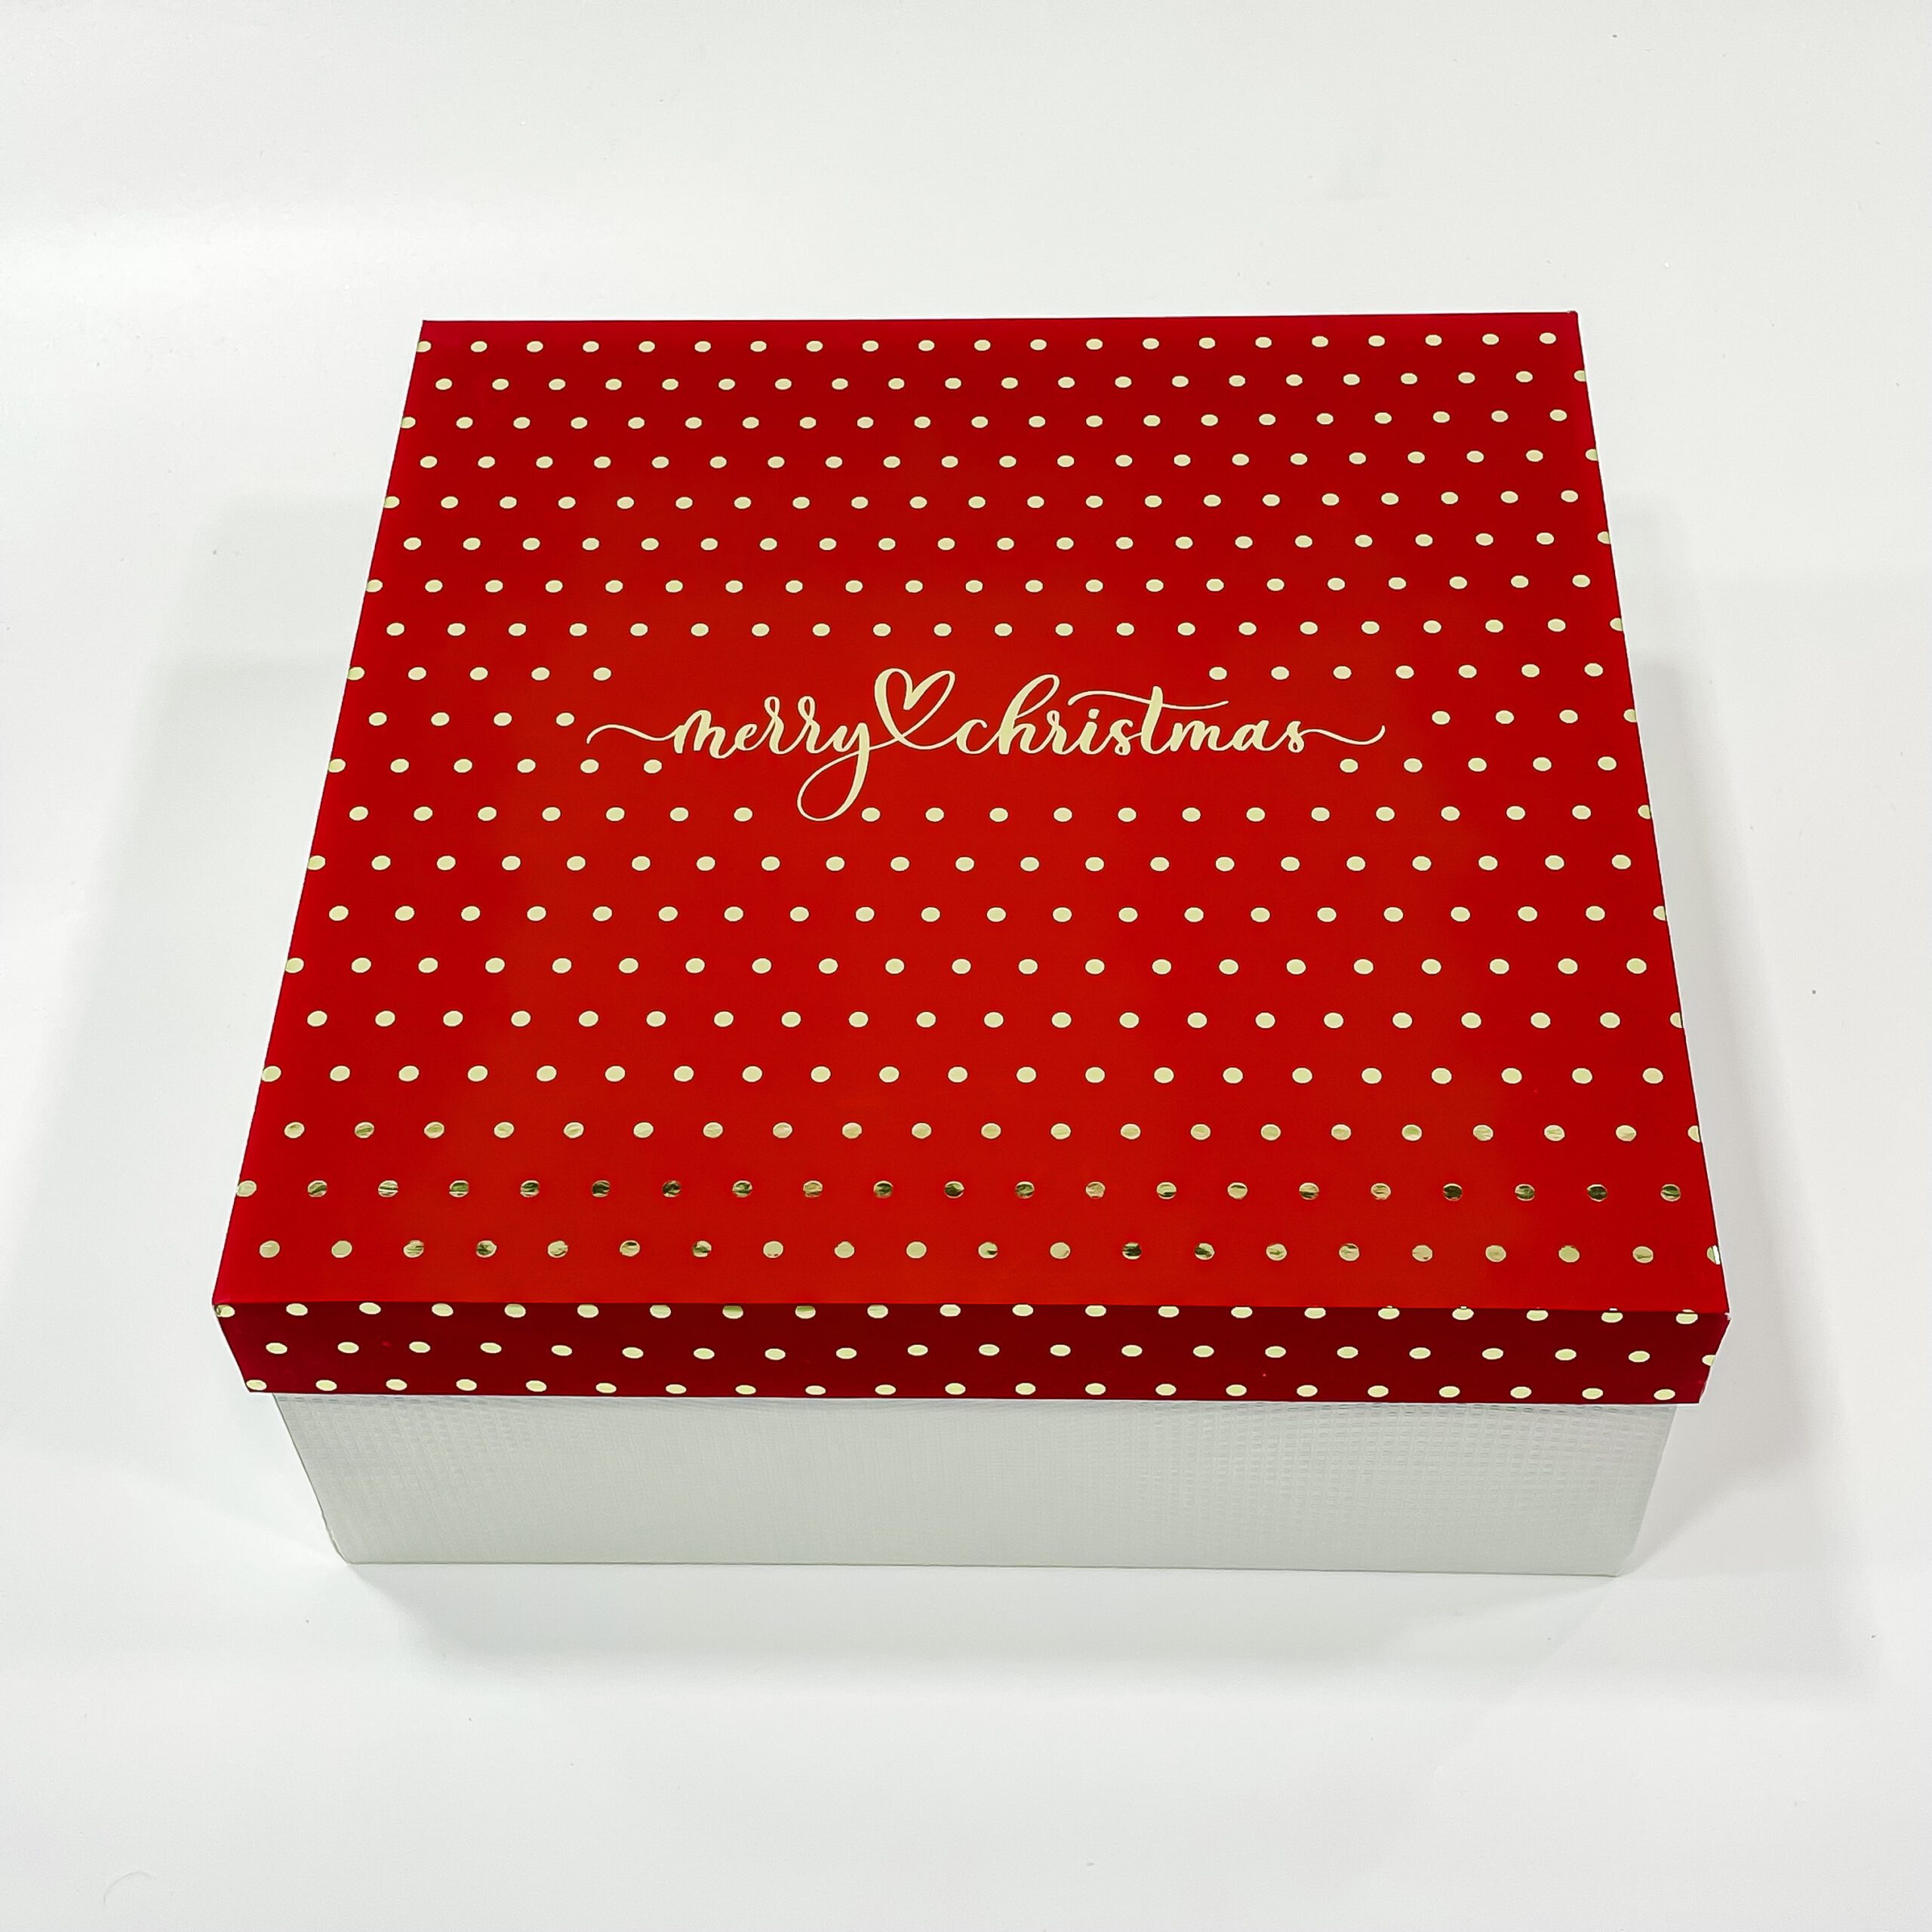 Empty Christmas Gift Box Gold foil Printed